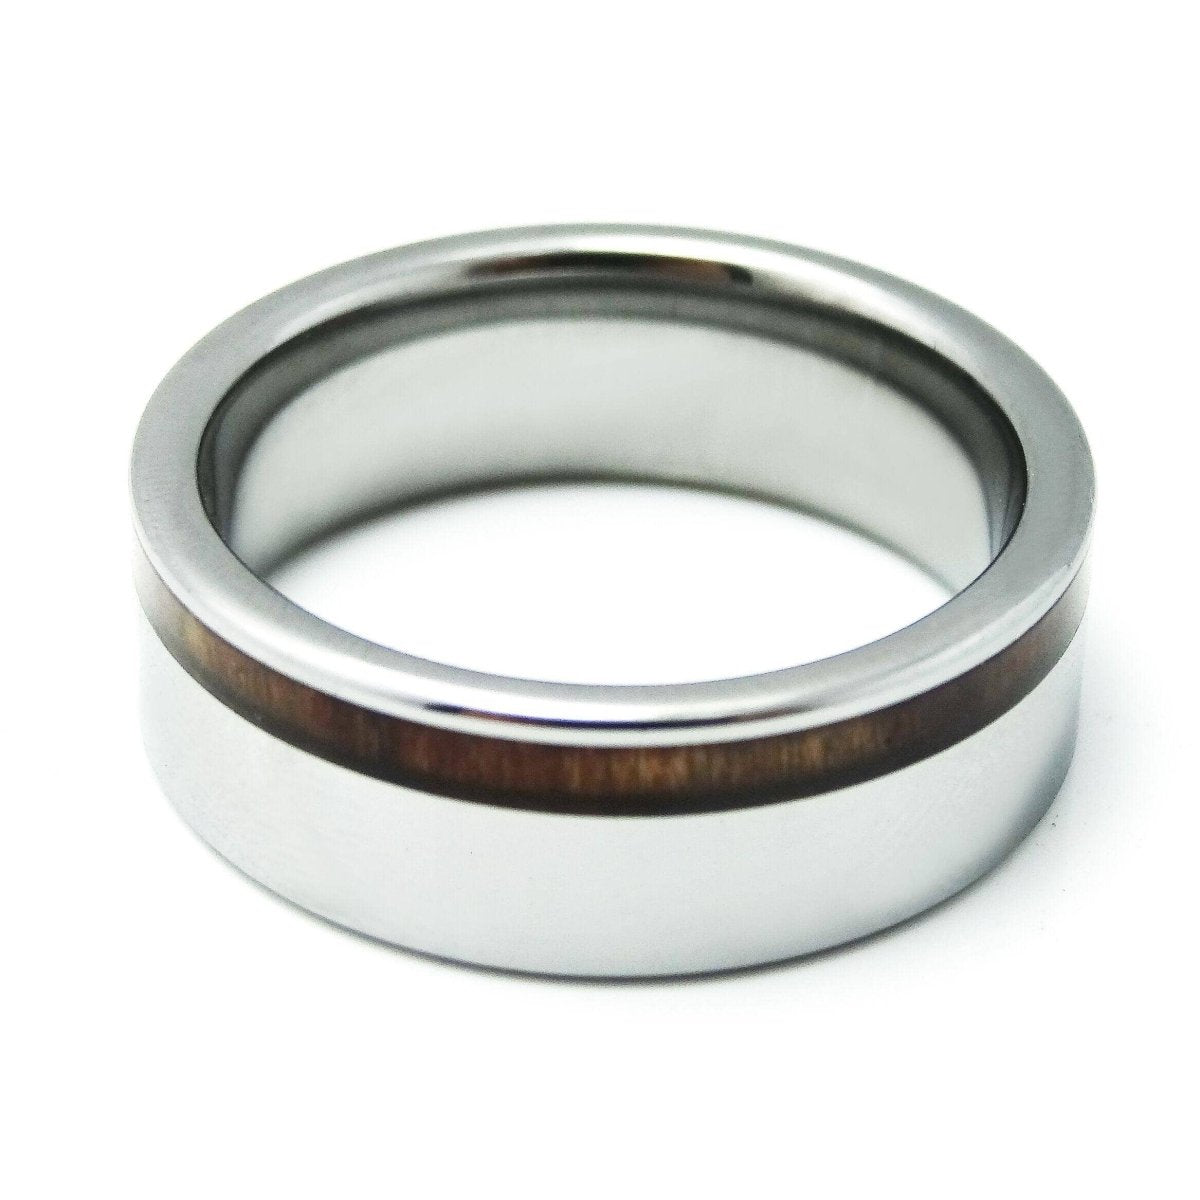 a focal view of a tungsten steel inlaid wood ecofriendly jewelry